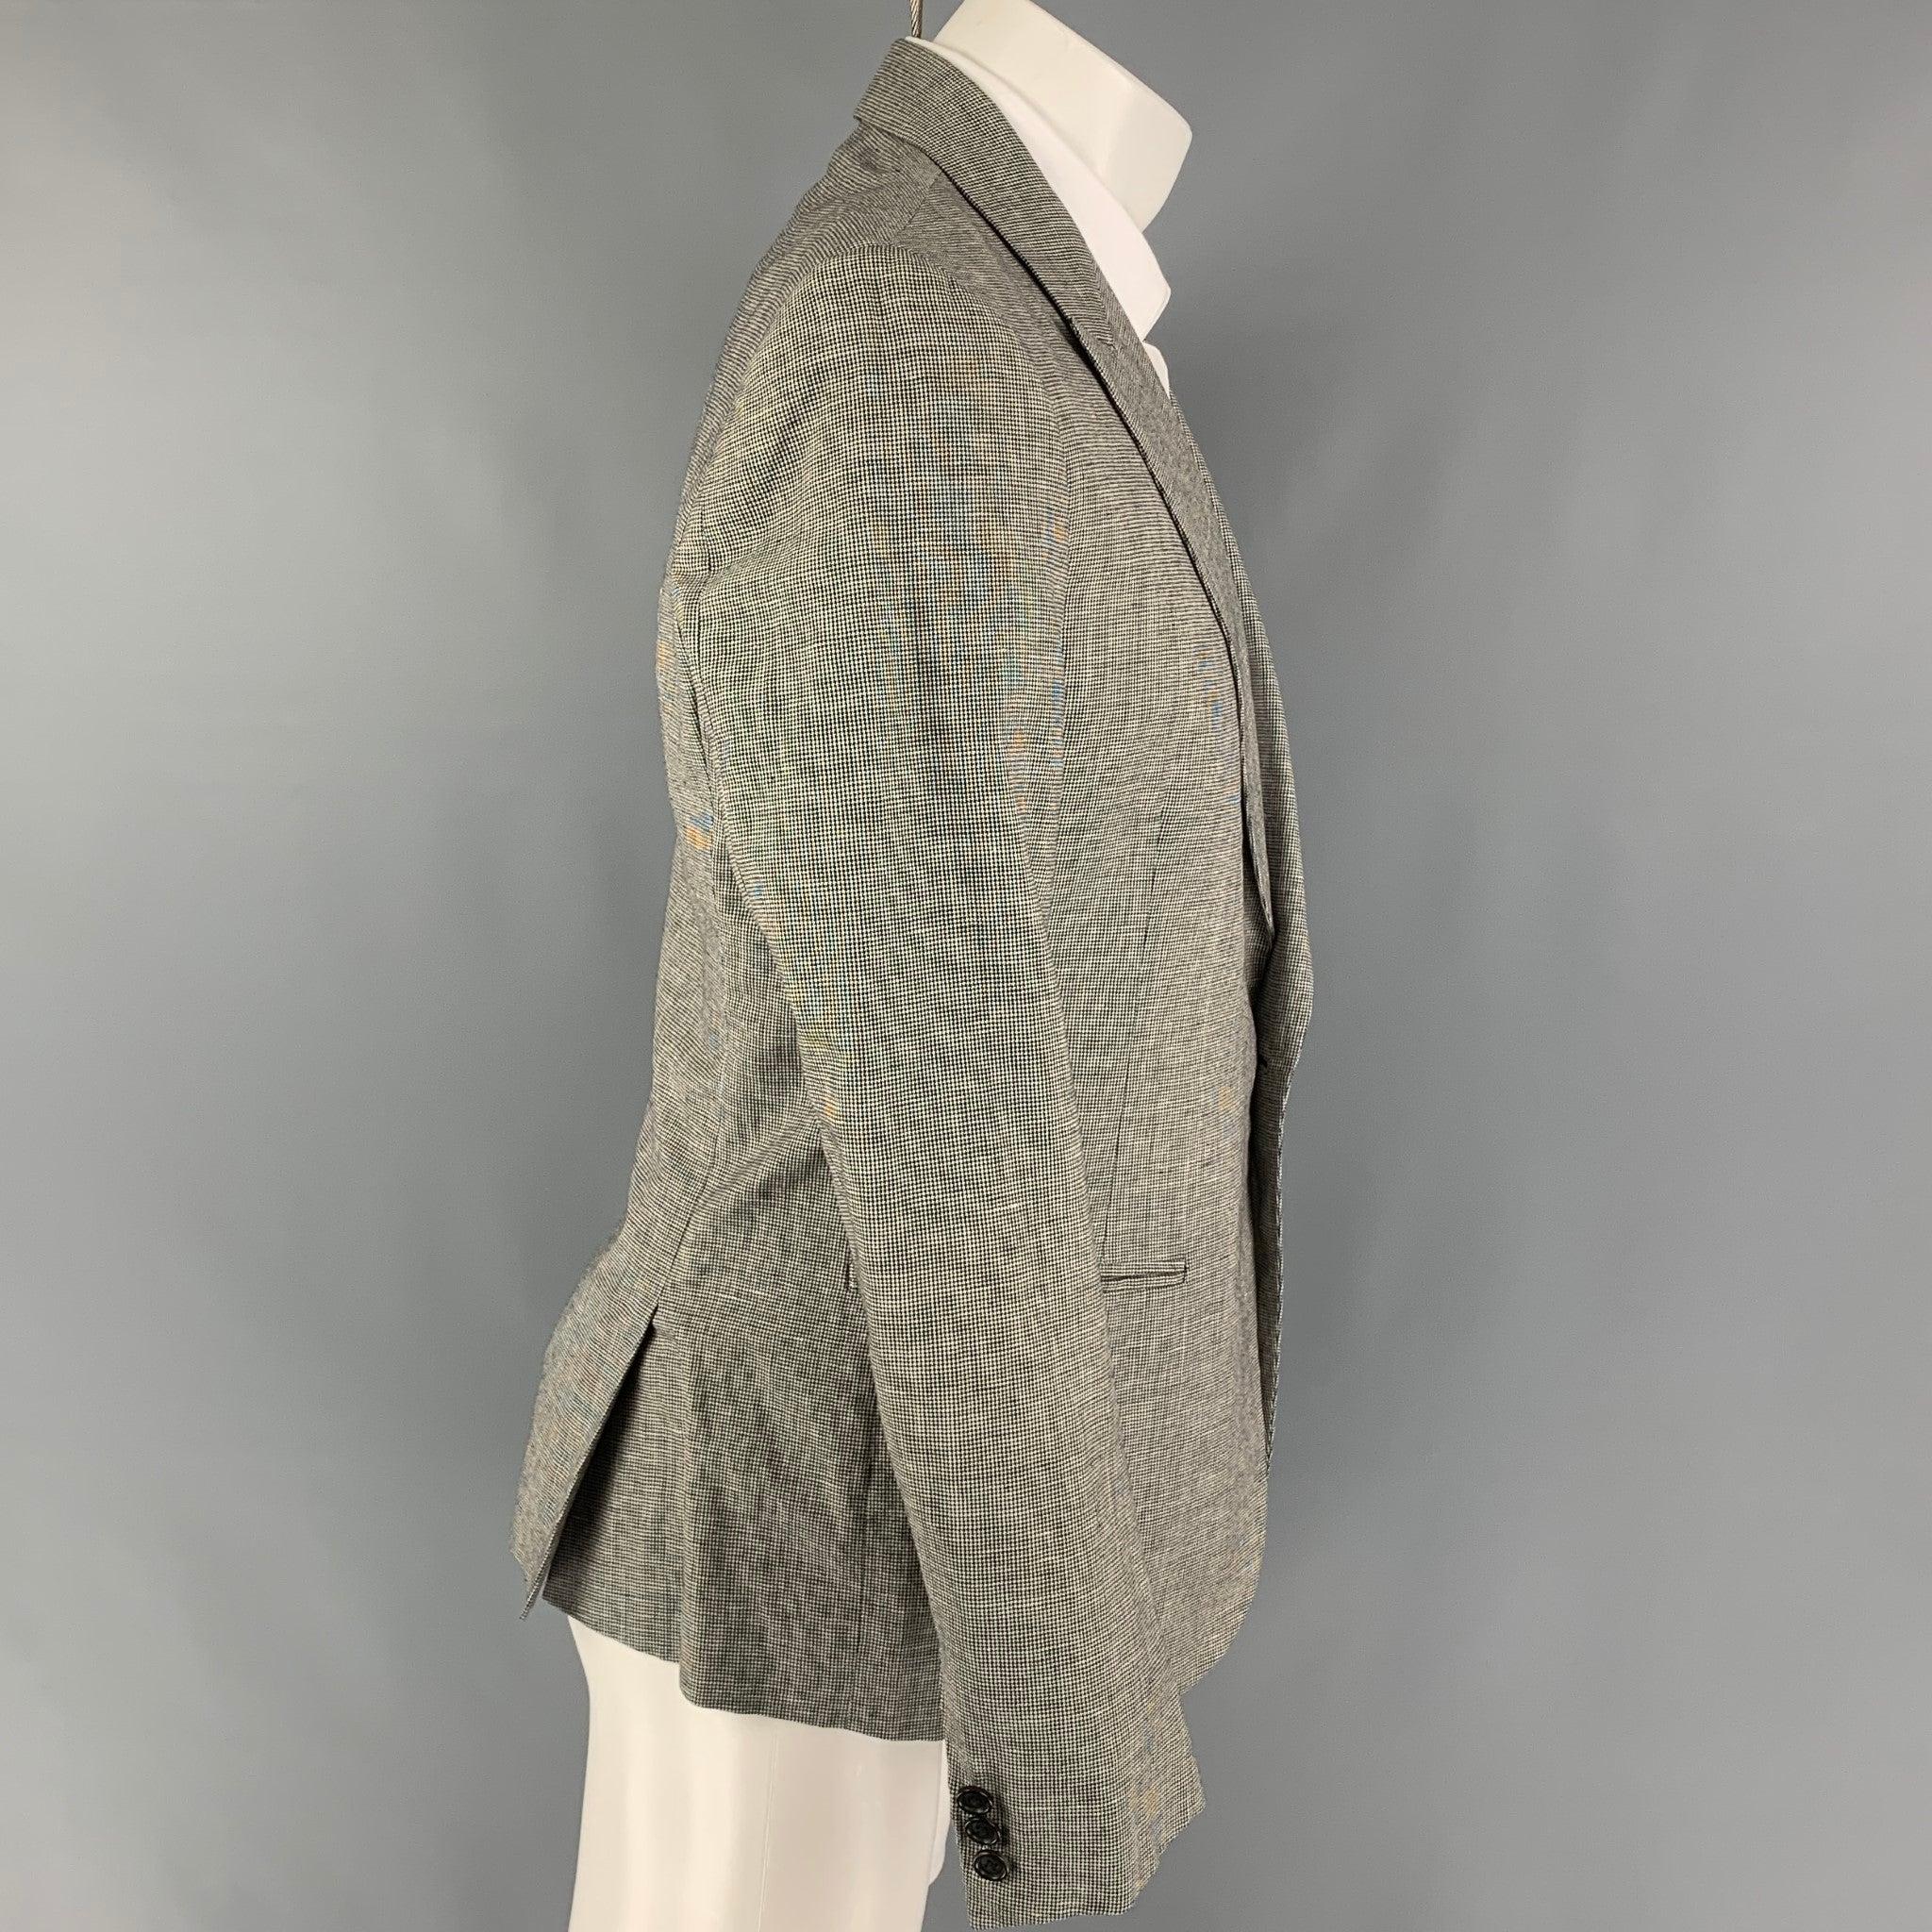 BAND OF OUTSIDERS sport coat comes in a black & white houndstooth wool with a full liner featuring a peak lapel, slit pockets, double back vent, and a single button closure.
Very Good
Pre-Owned Condition. 

Marked:   4 

Measurements: 
